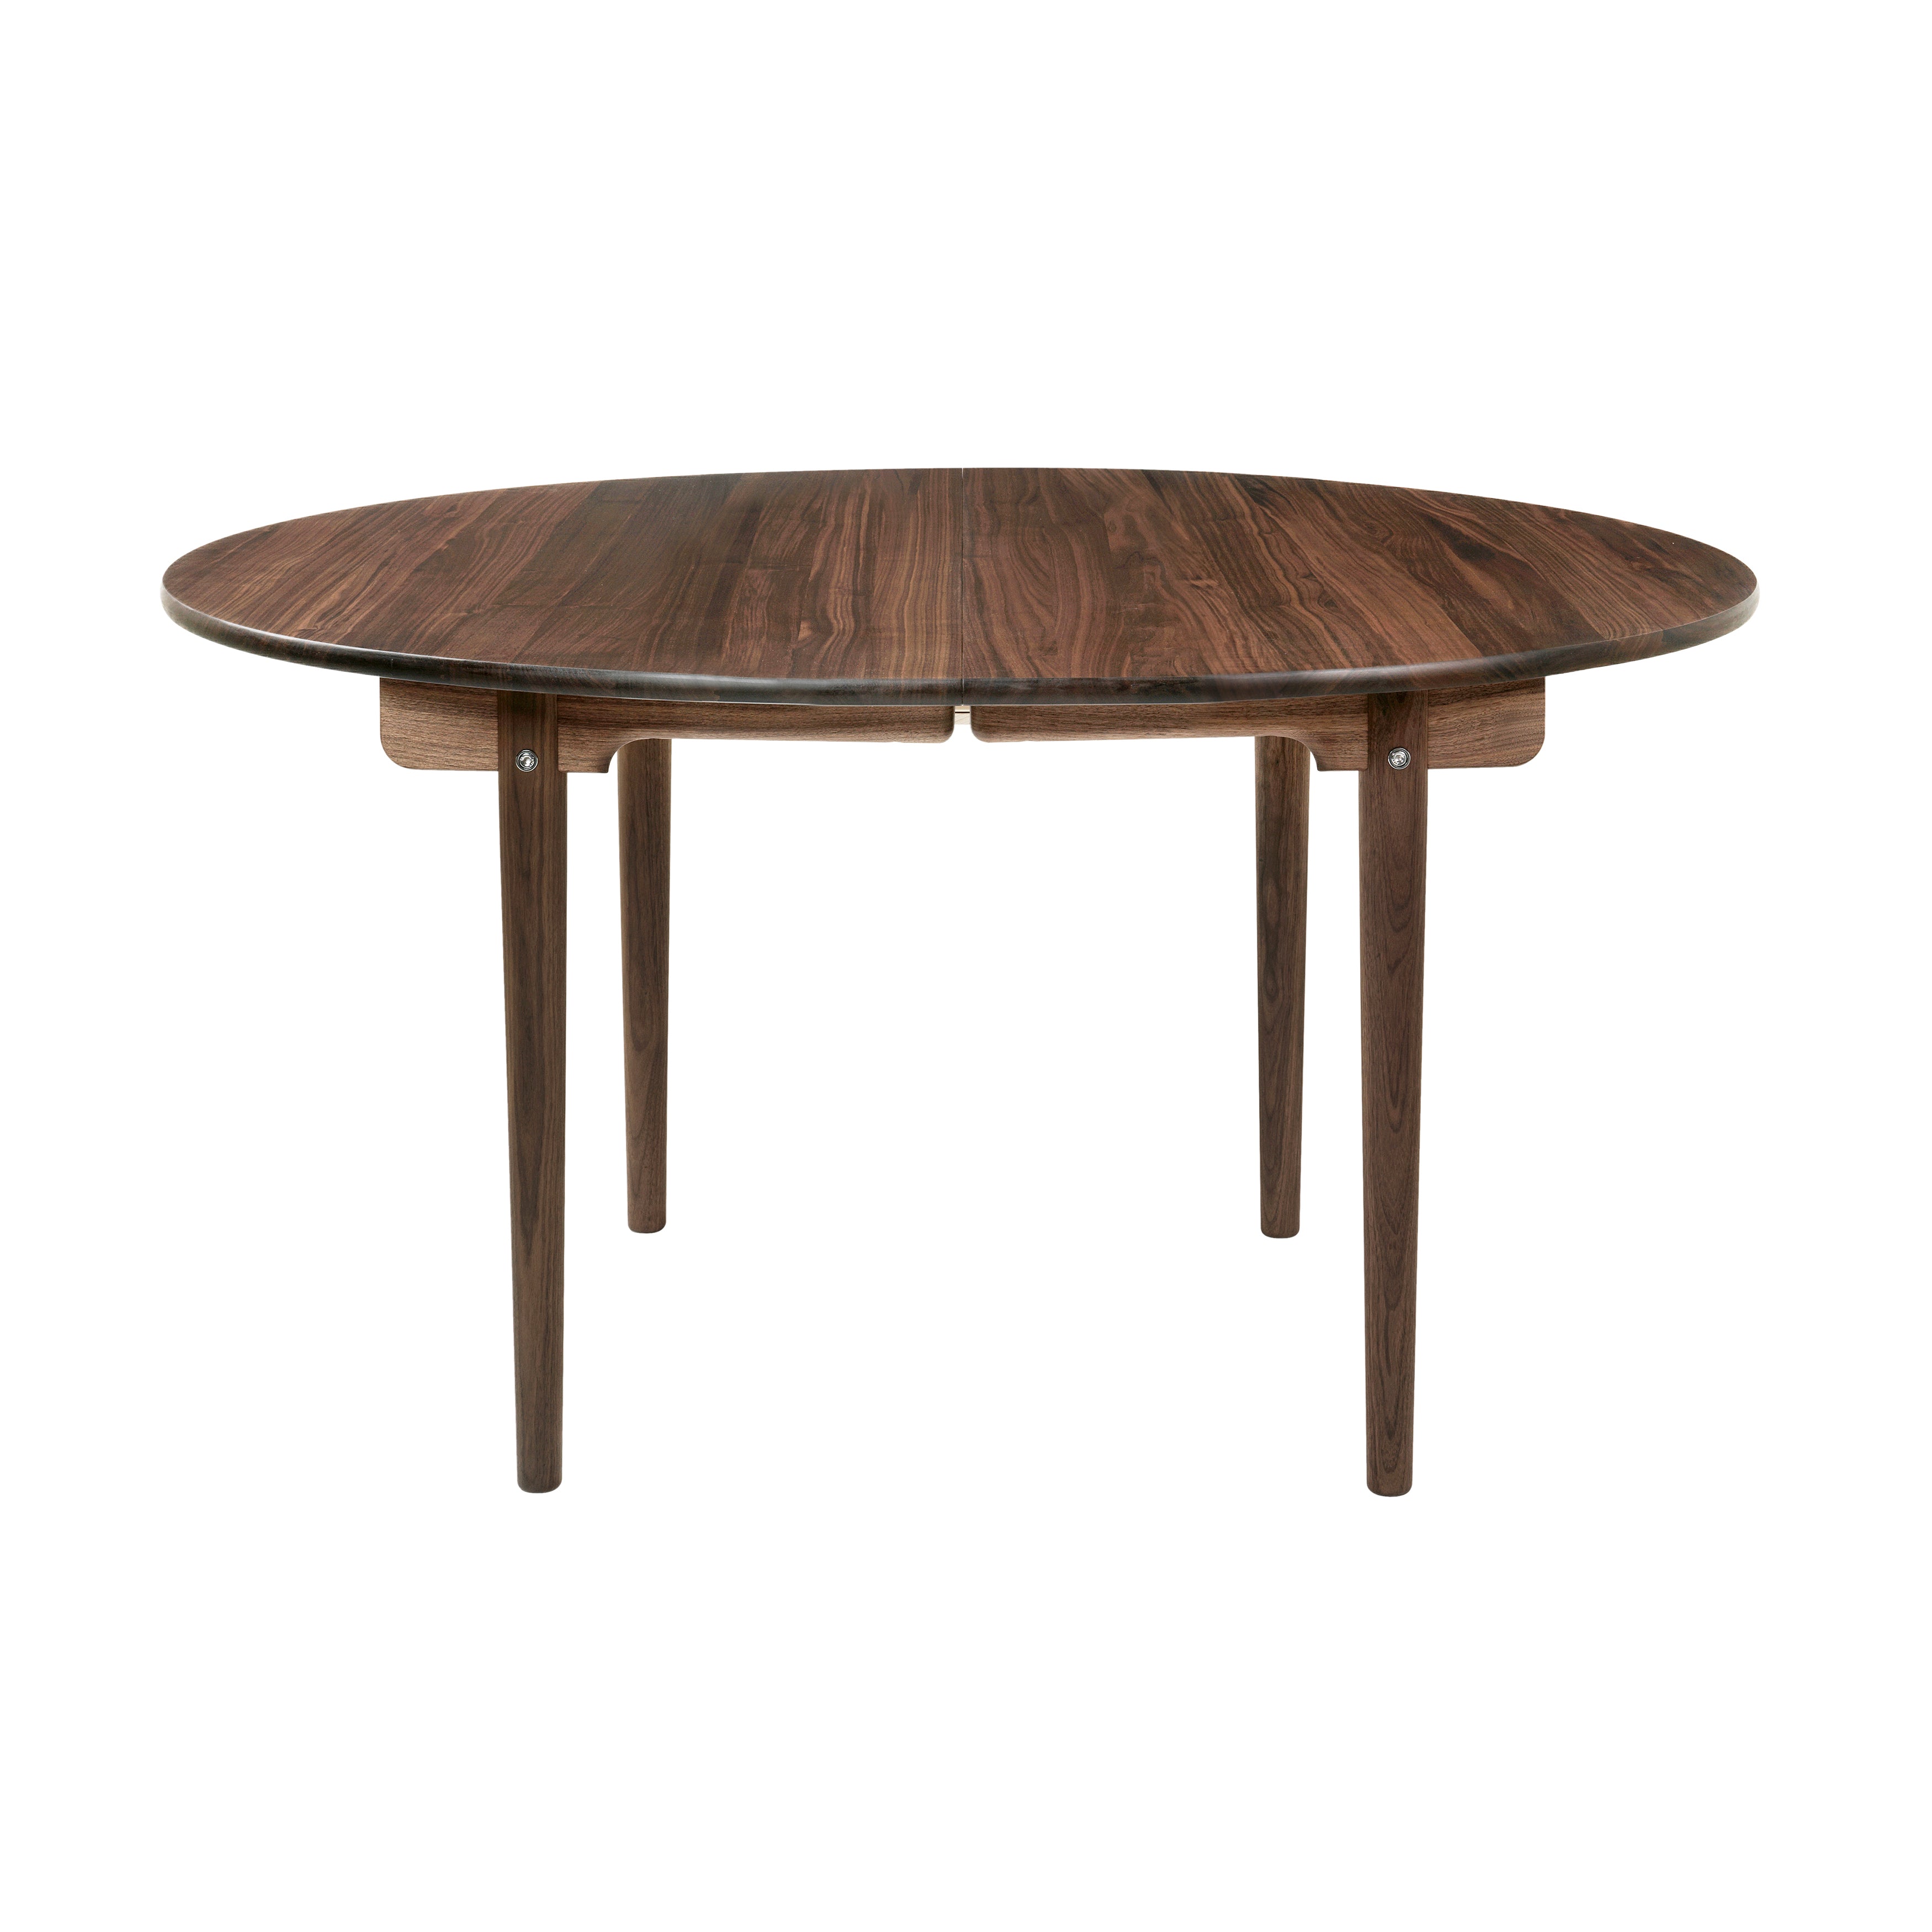 CH337 Dining Table: Oiled Walnut + Without Leaf